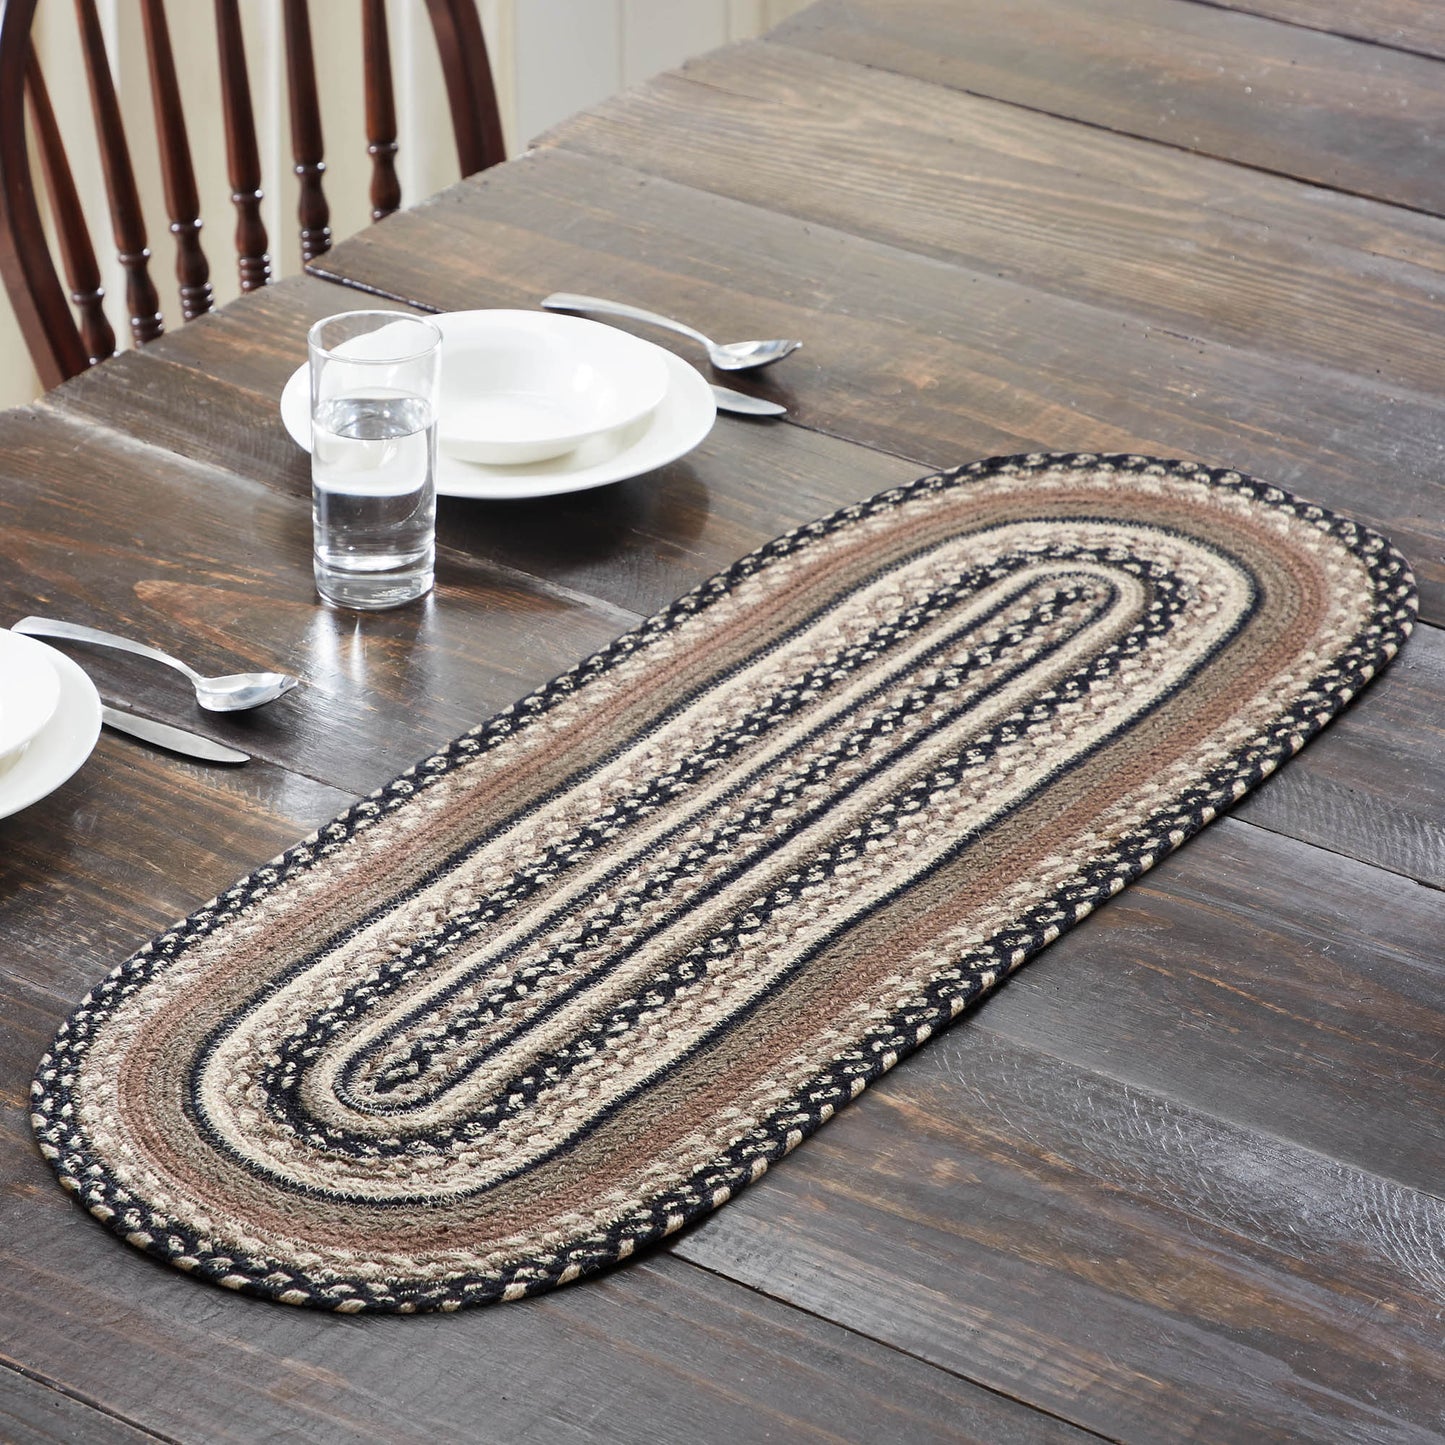 81451-Sawyer-Mill-Charcoal-Creme-Jute-Oval-Runner-13x36-image-3